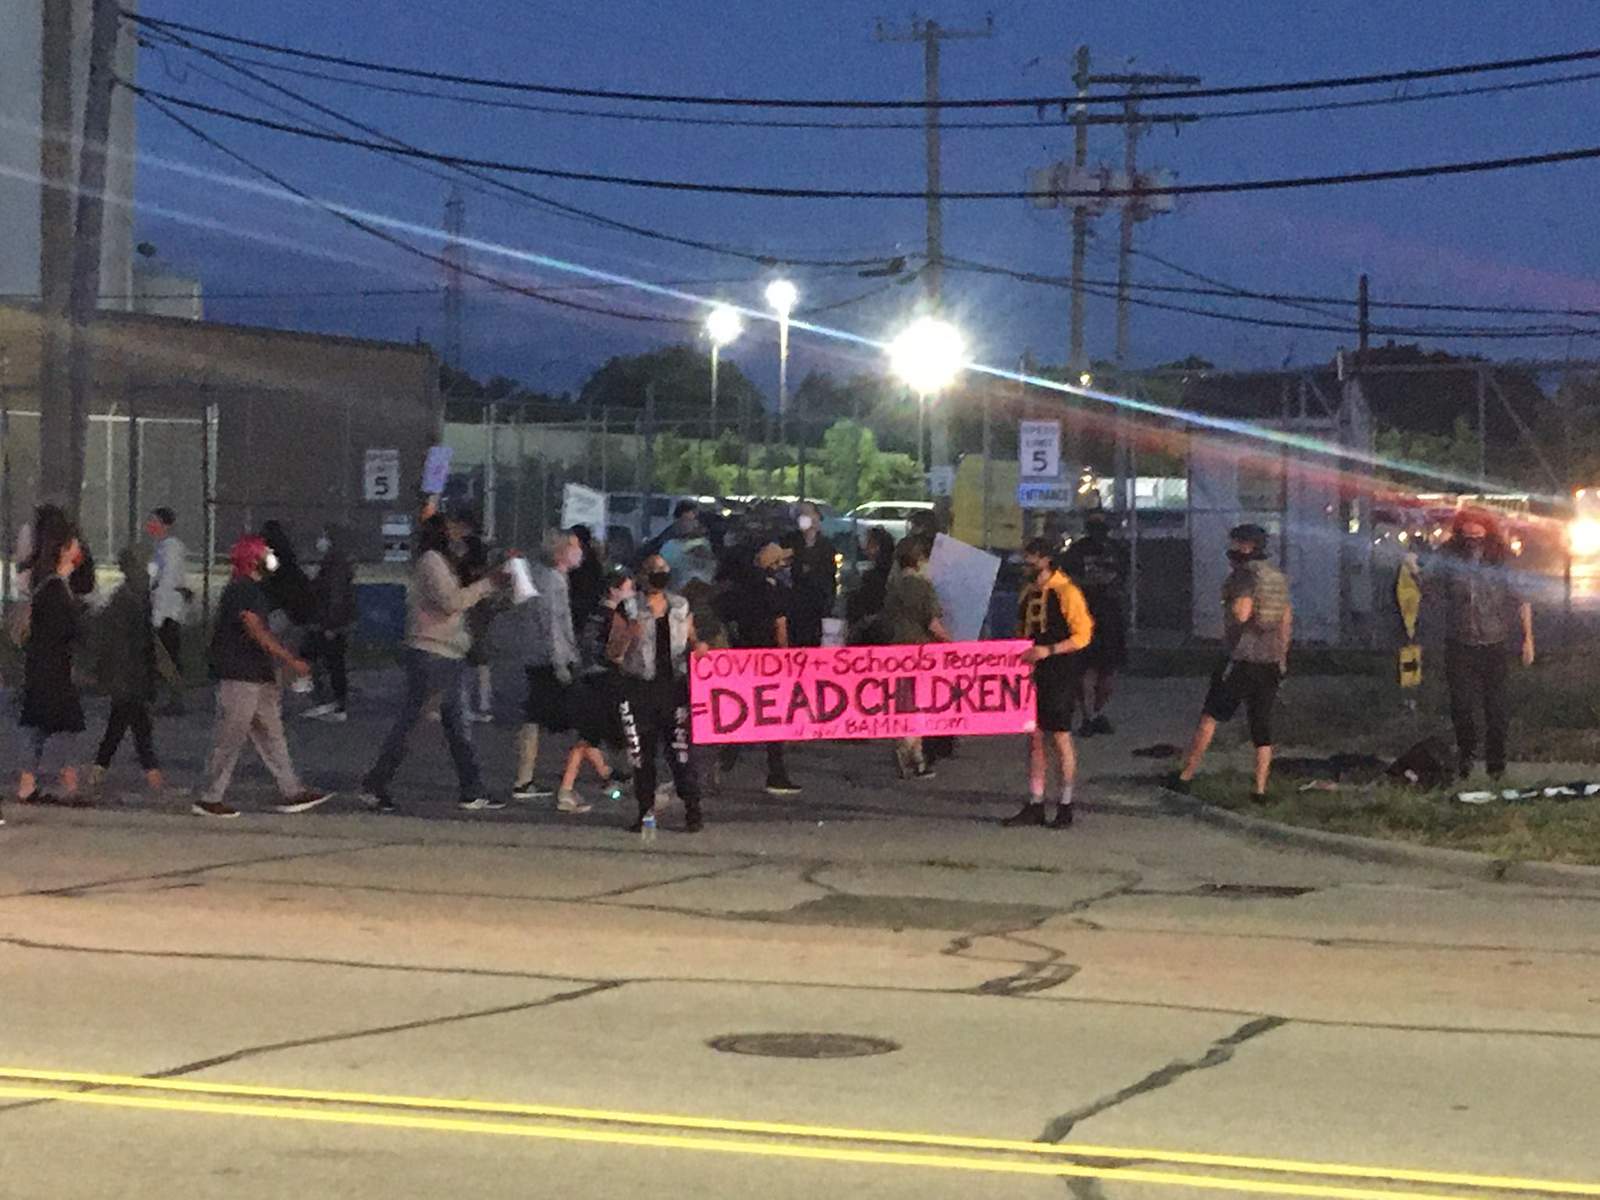 Protesters block DPSCD bus yard on first morning of in-person summer school